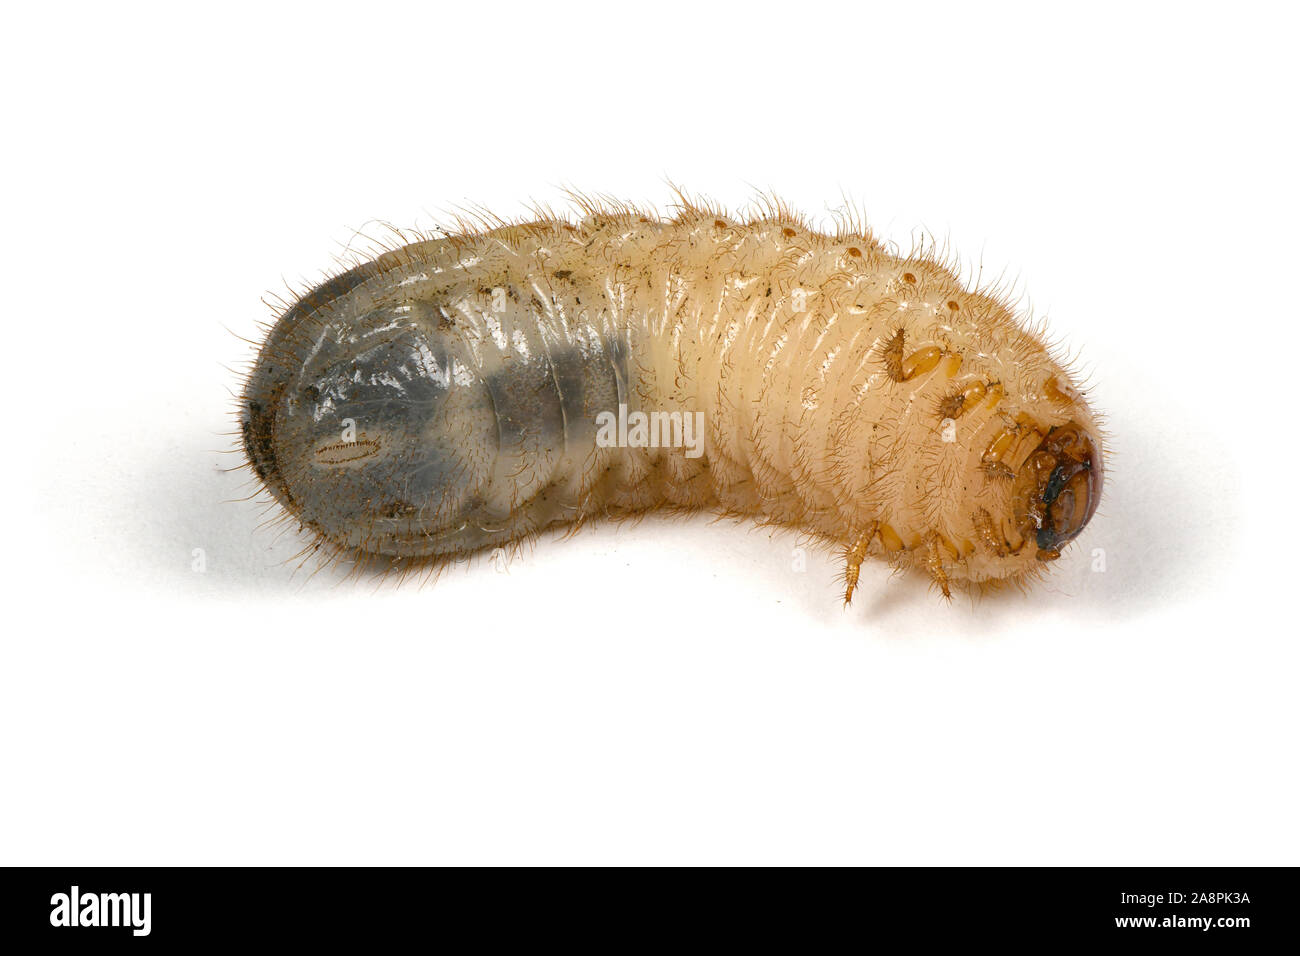 Larva of a may beetle (Melolontha) isolated on a white background. High resolution photo. Full depth of field. Stock Photo